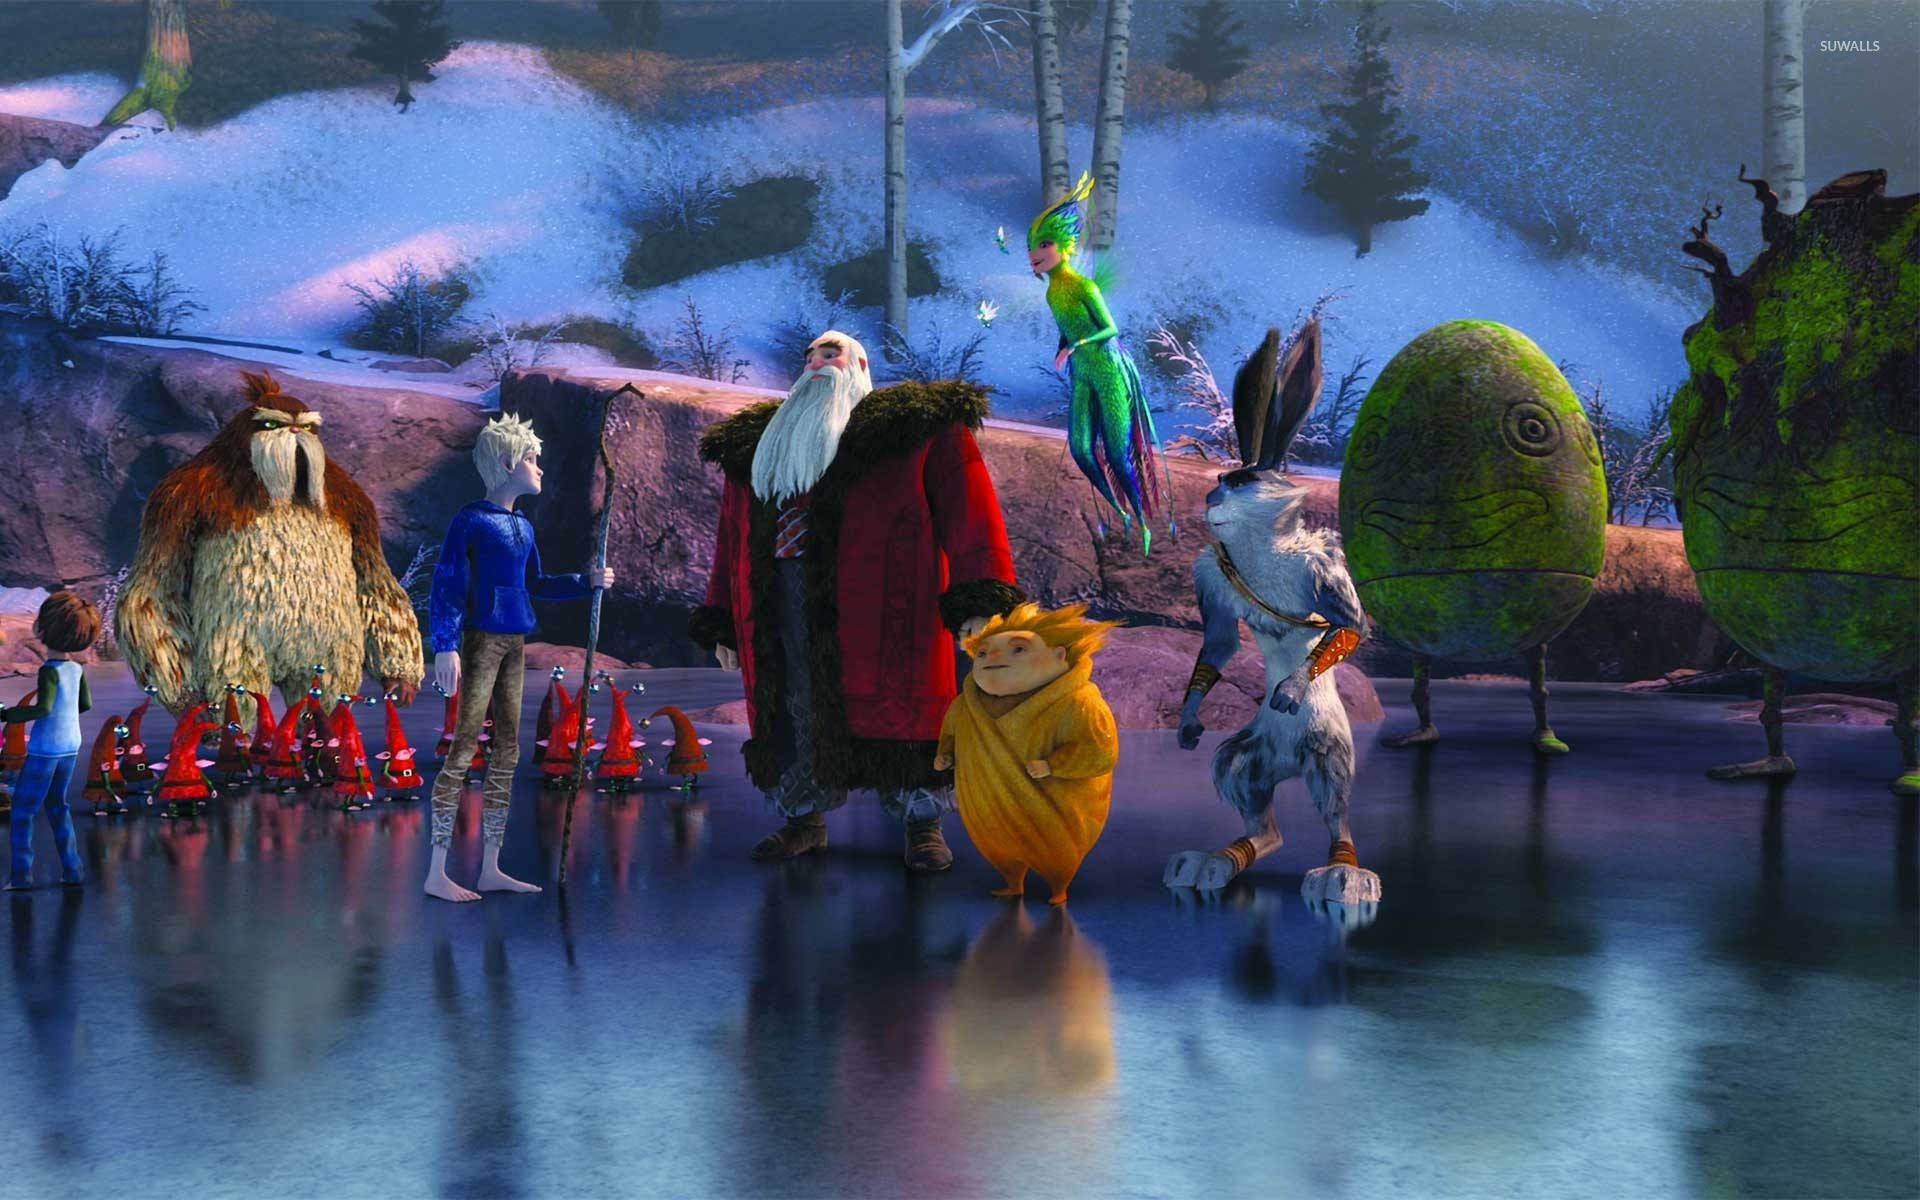 a group of characters standing in a snowy scene Wallpaper